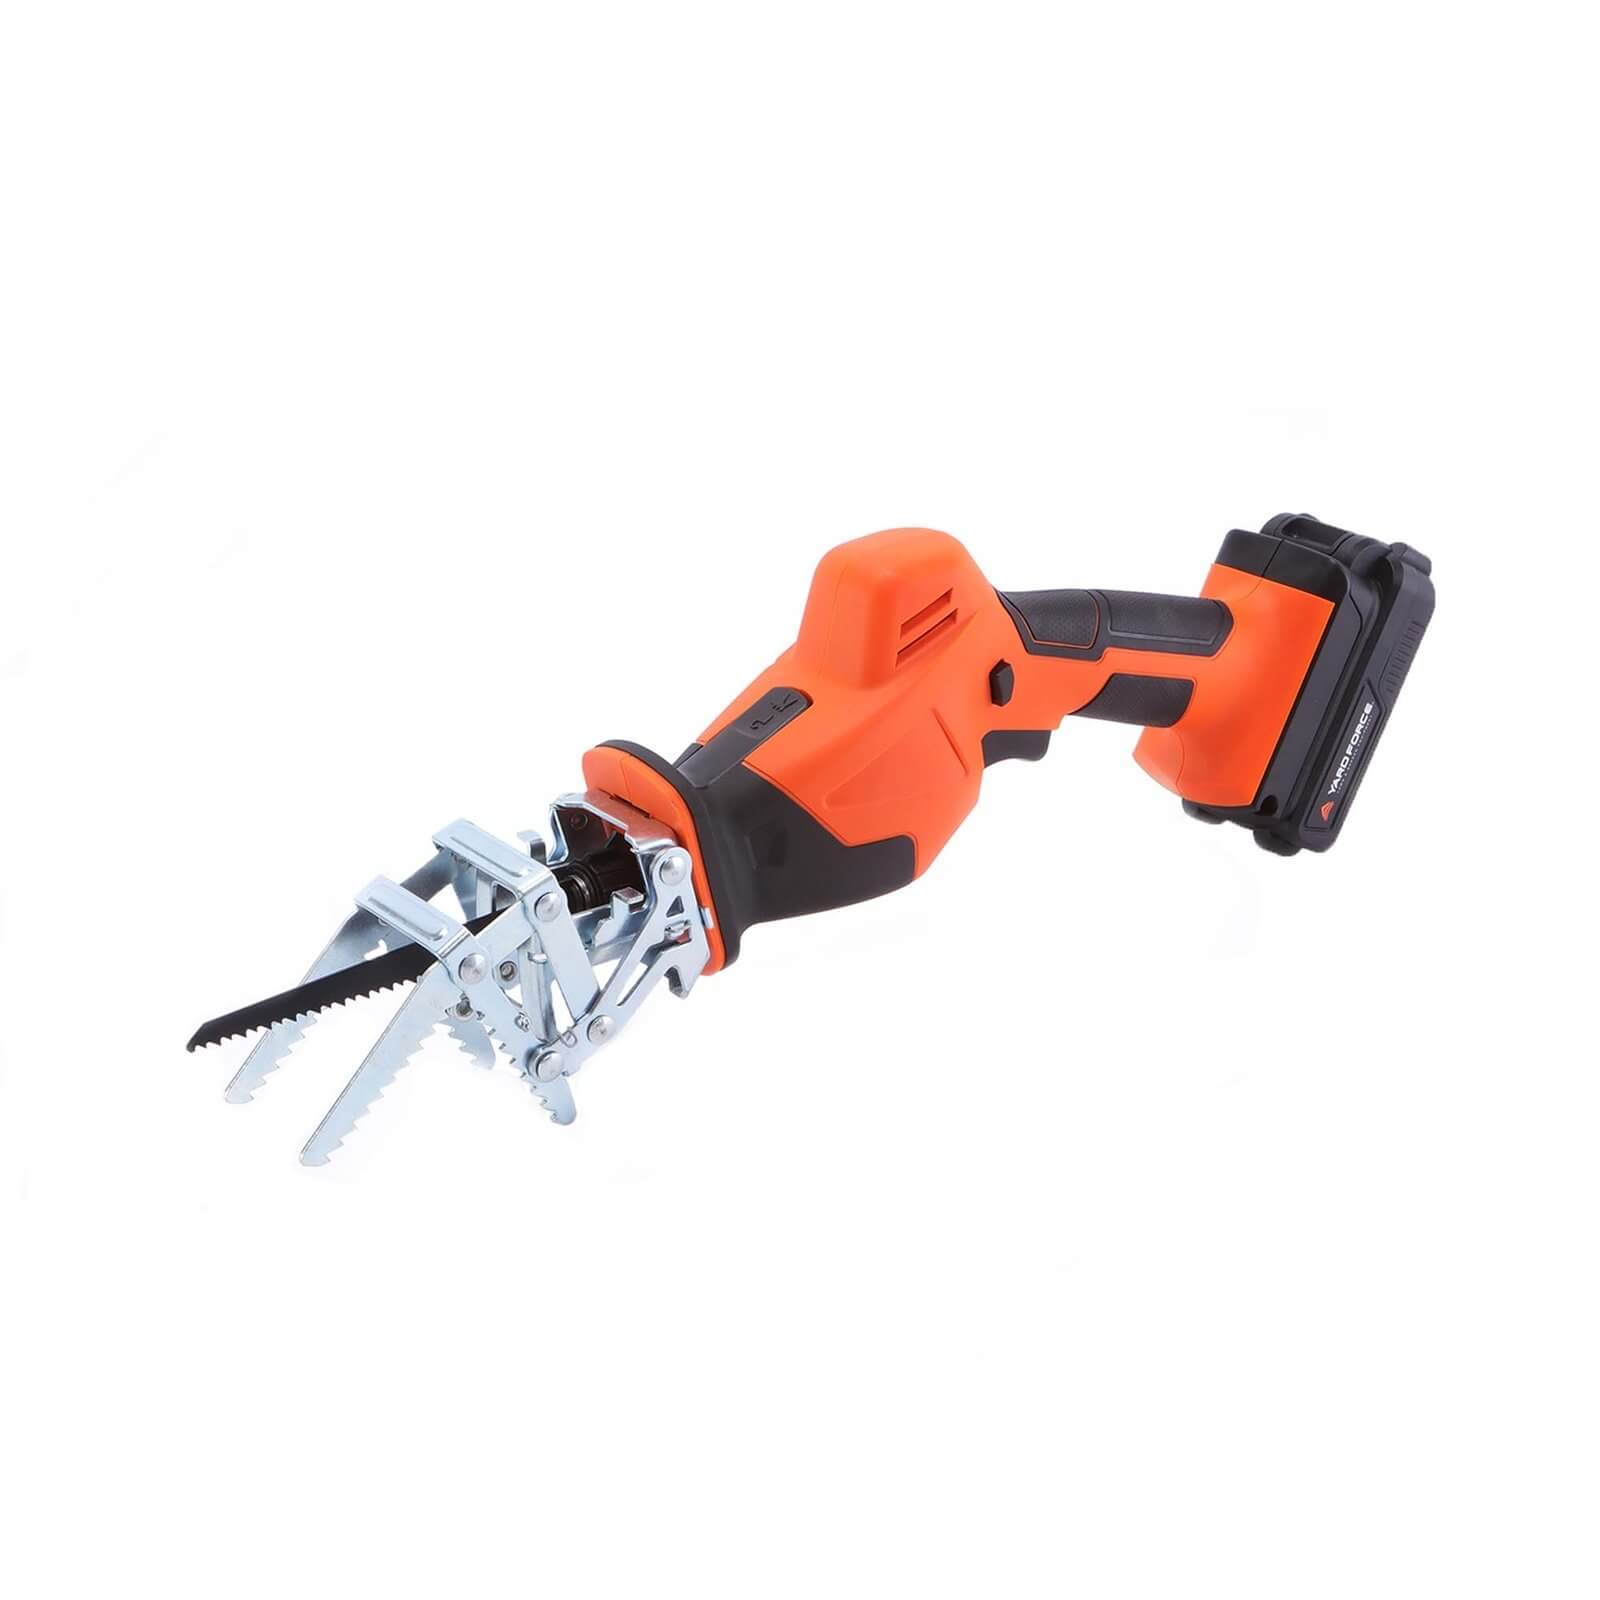 Yard Force 20V Cordless Garden Saw with Multiple Blades, Clamping Jaw, 2.0Ah Lithium-Ion Battery & Charger